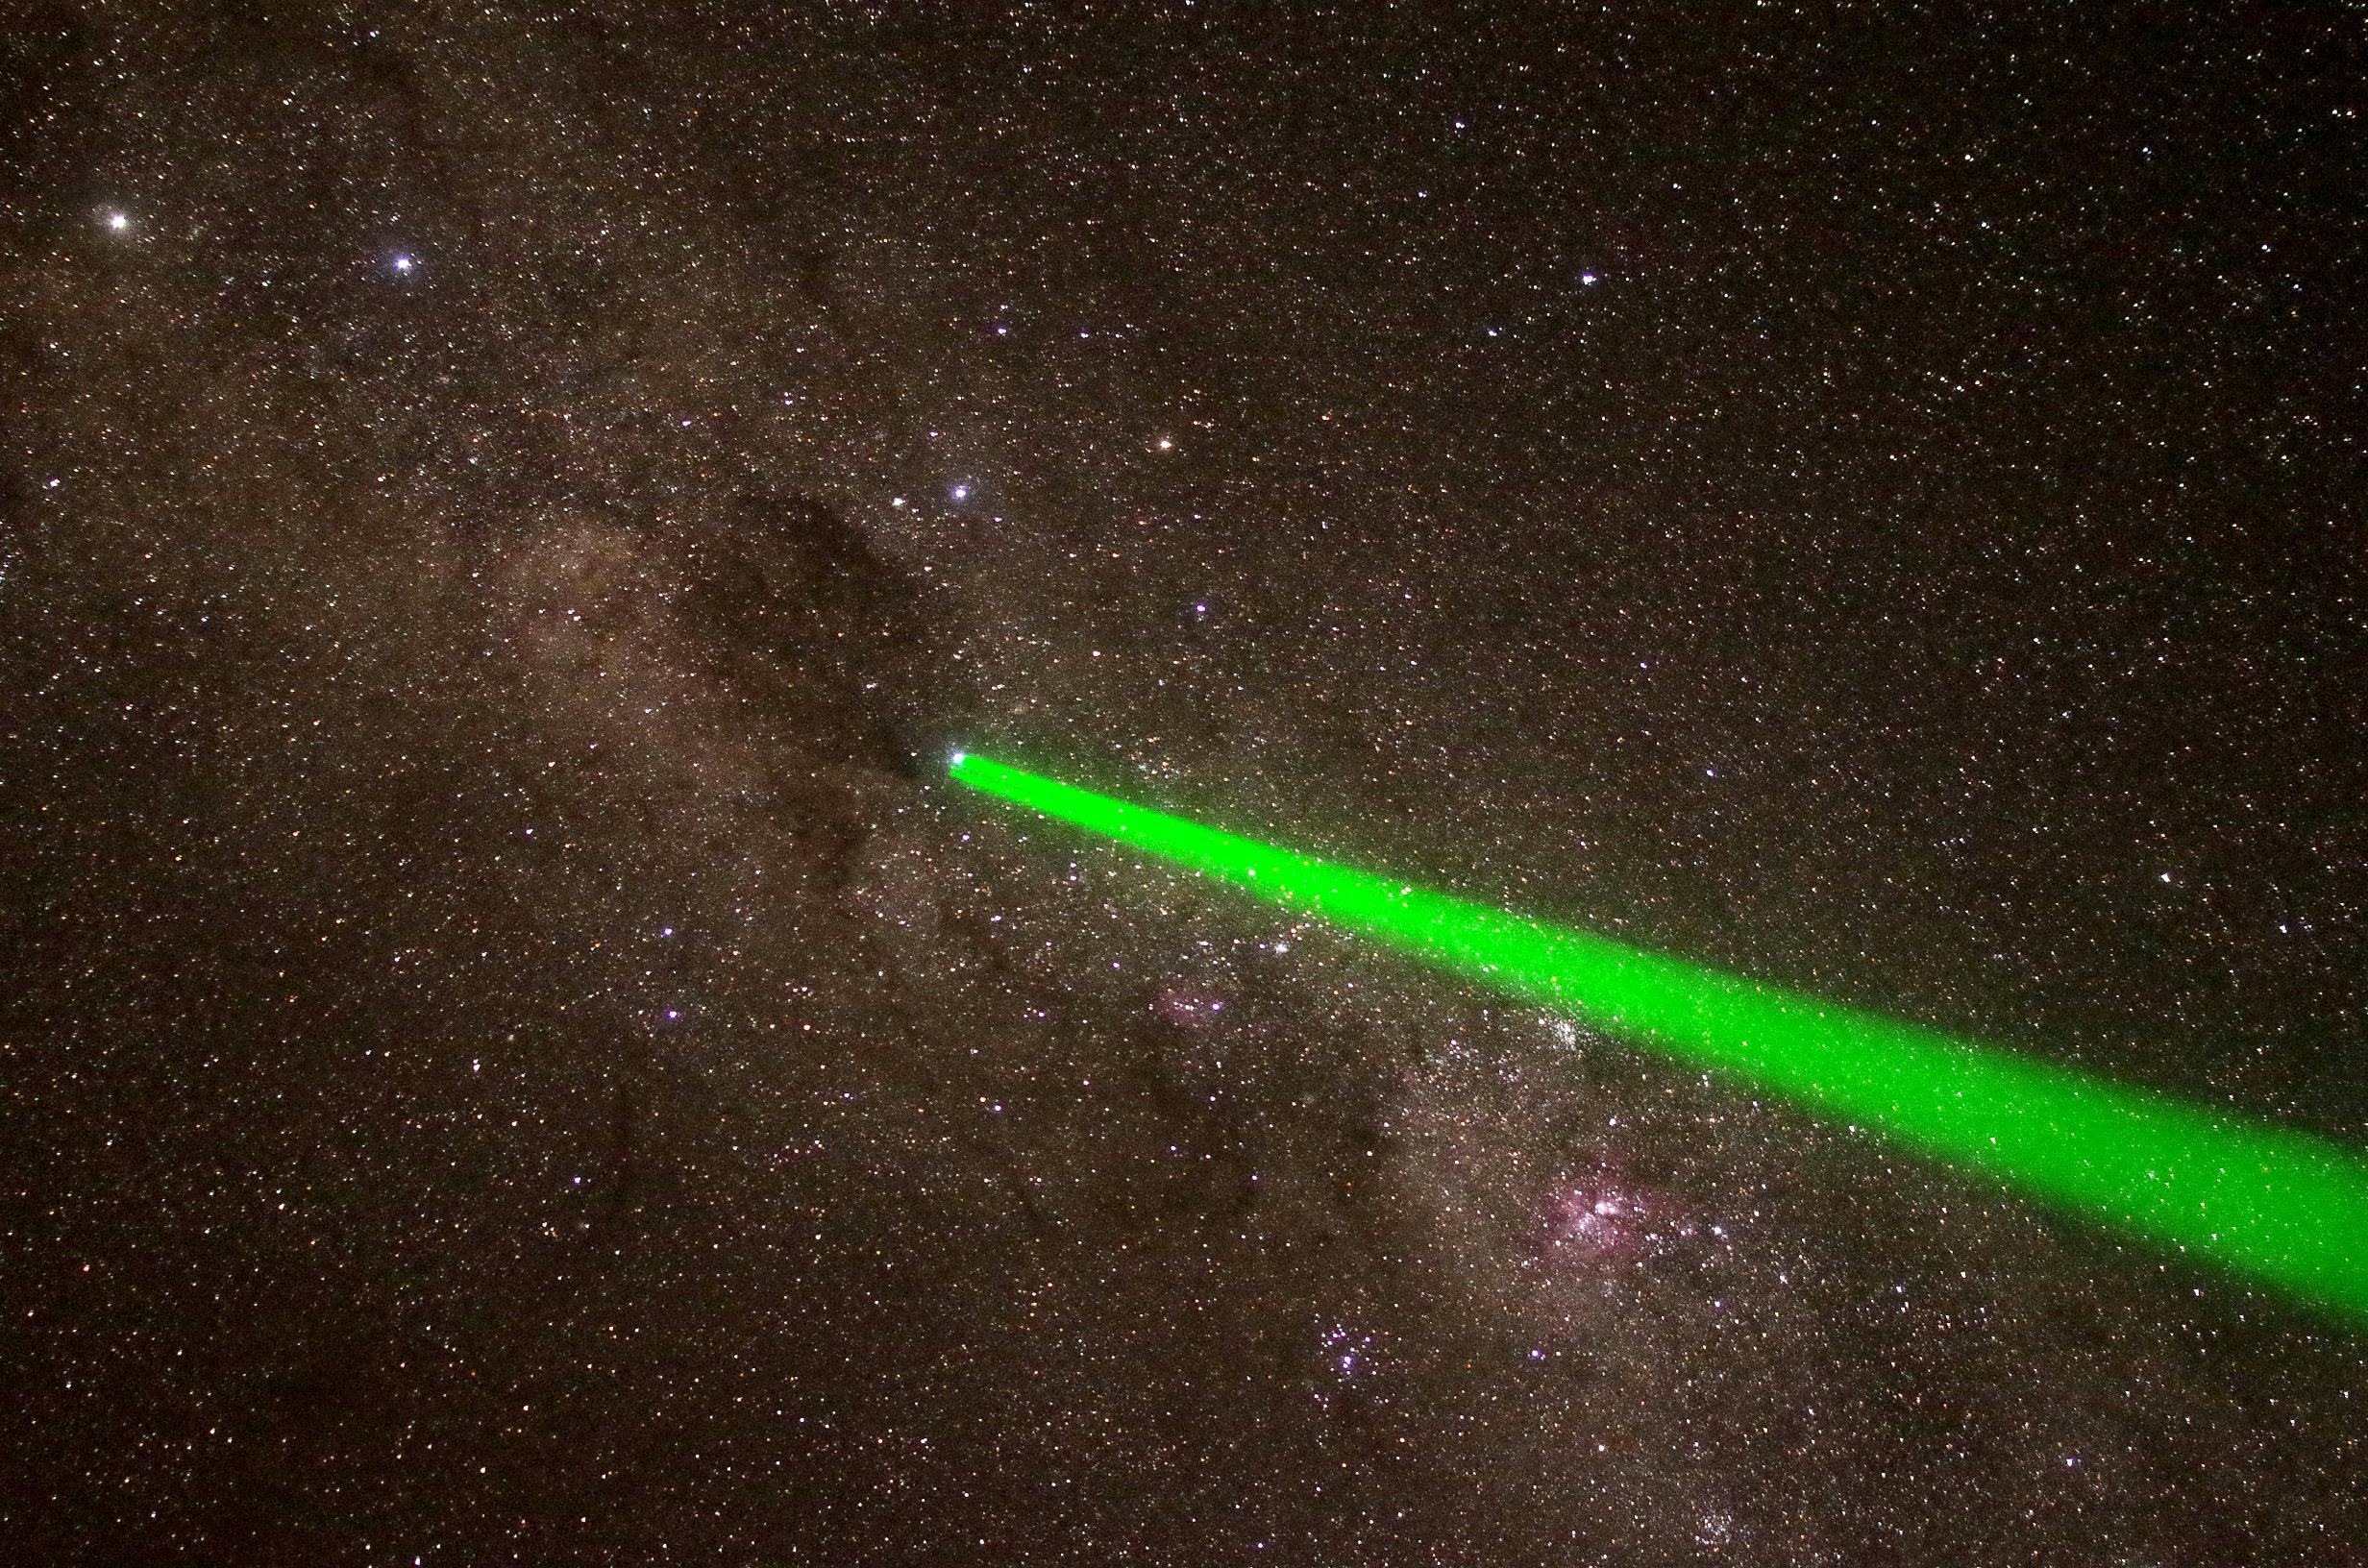 Laser pointer guided tour